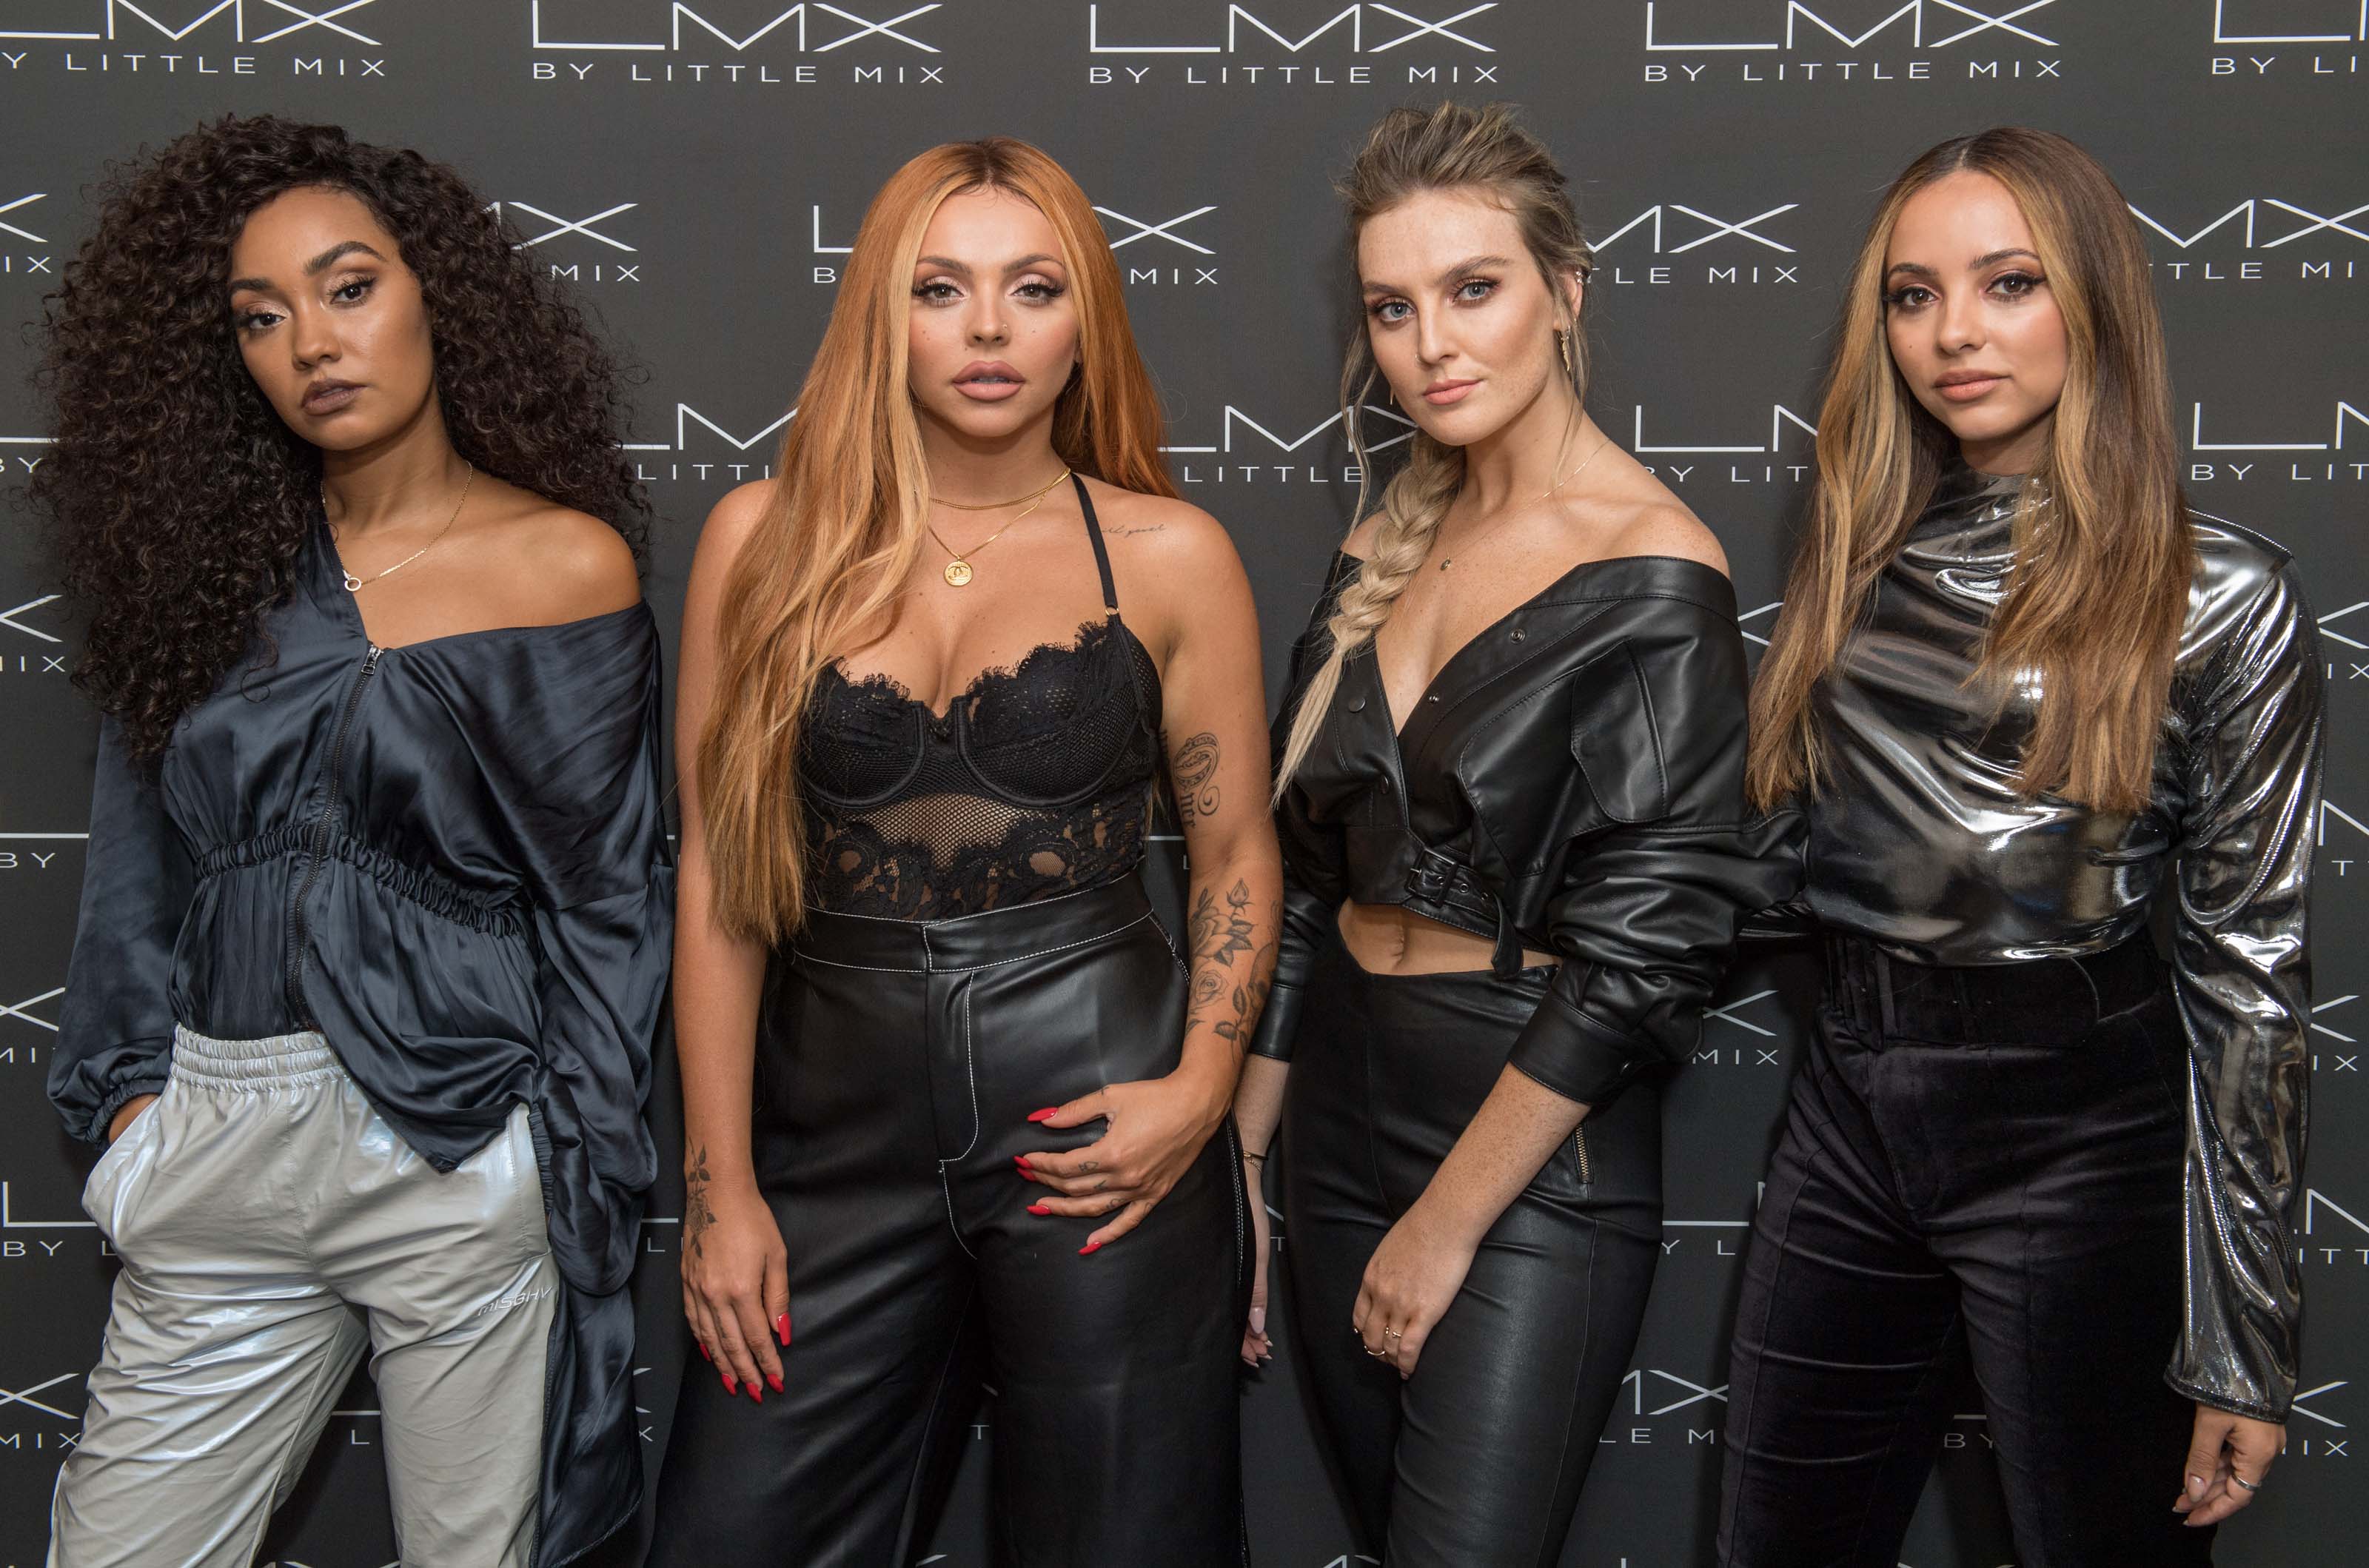 Leigh-Anne Pinnock, Jesy Nelson, Perrie Edwards and Jade Thirlwall ‘LMX by Little Mix’ launch